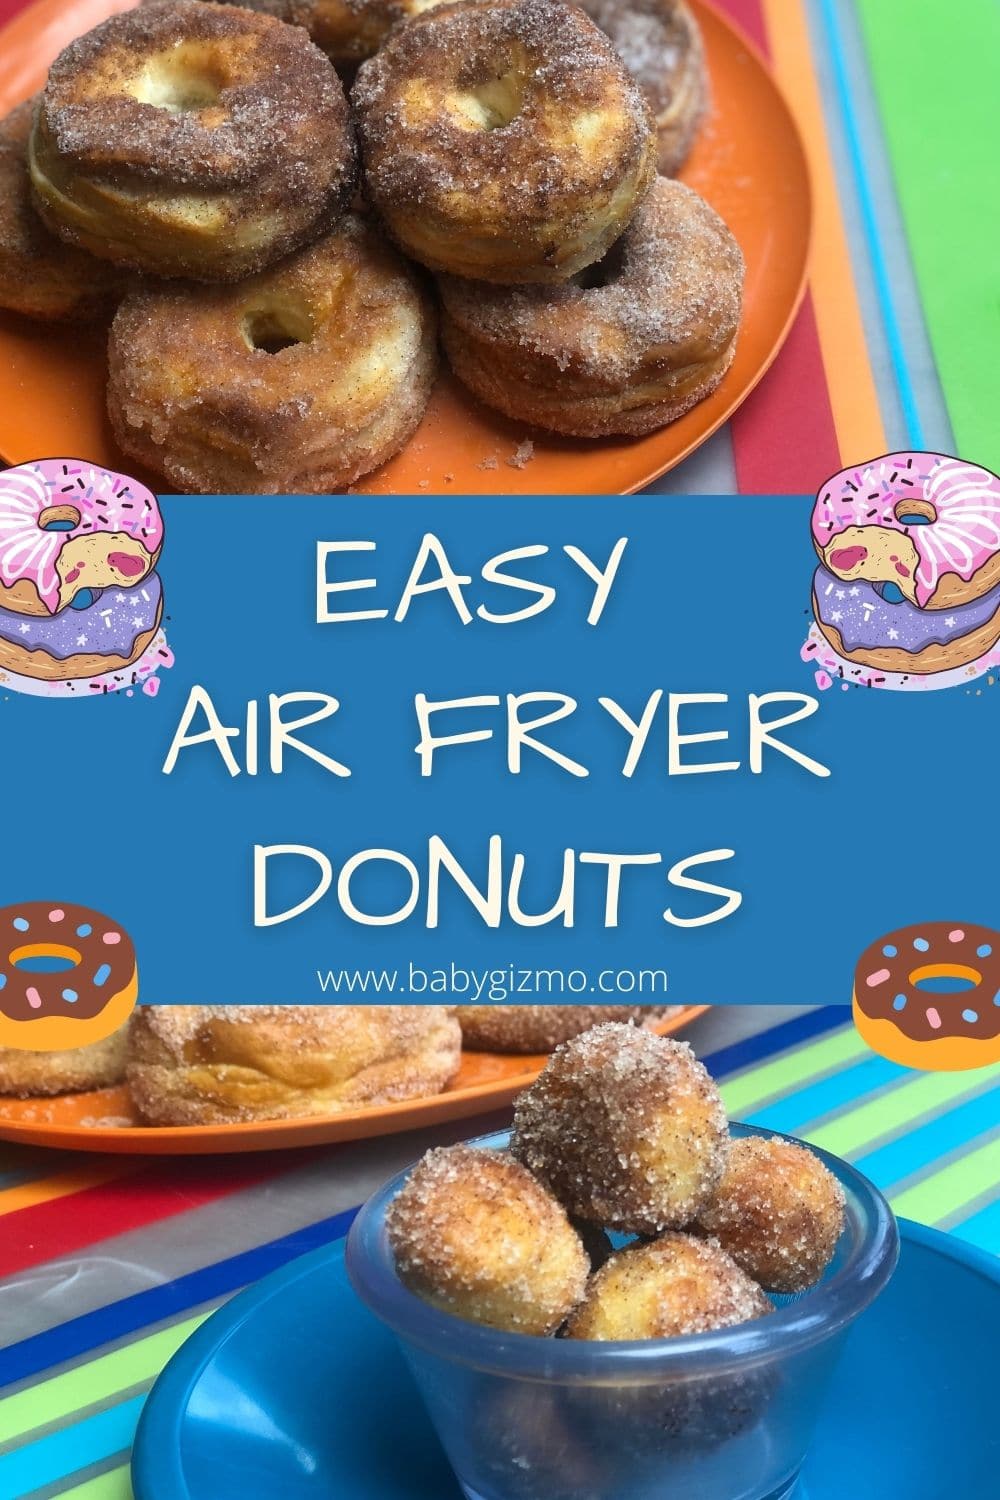 Air fryer donuts on striped mat